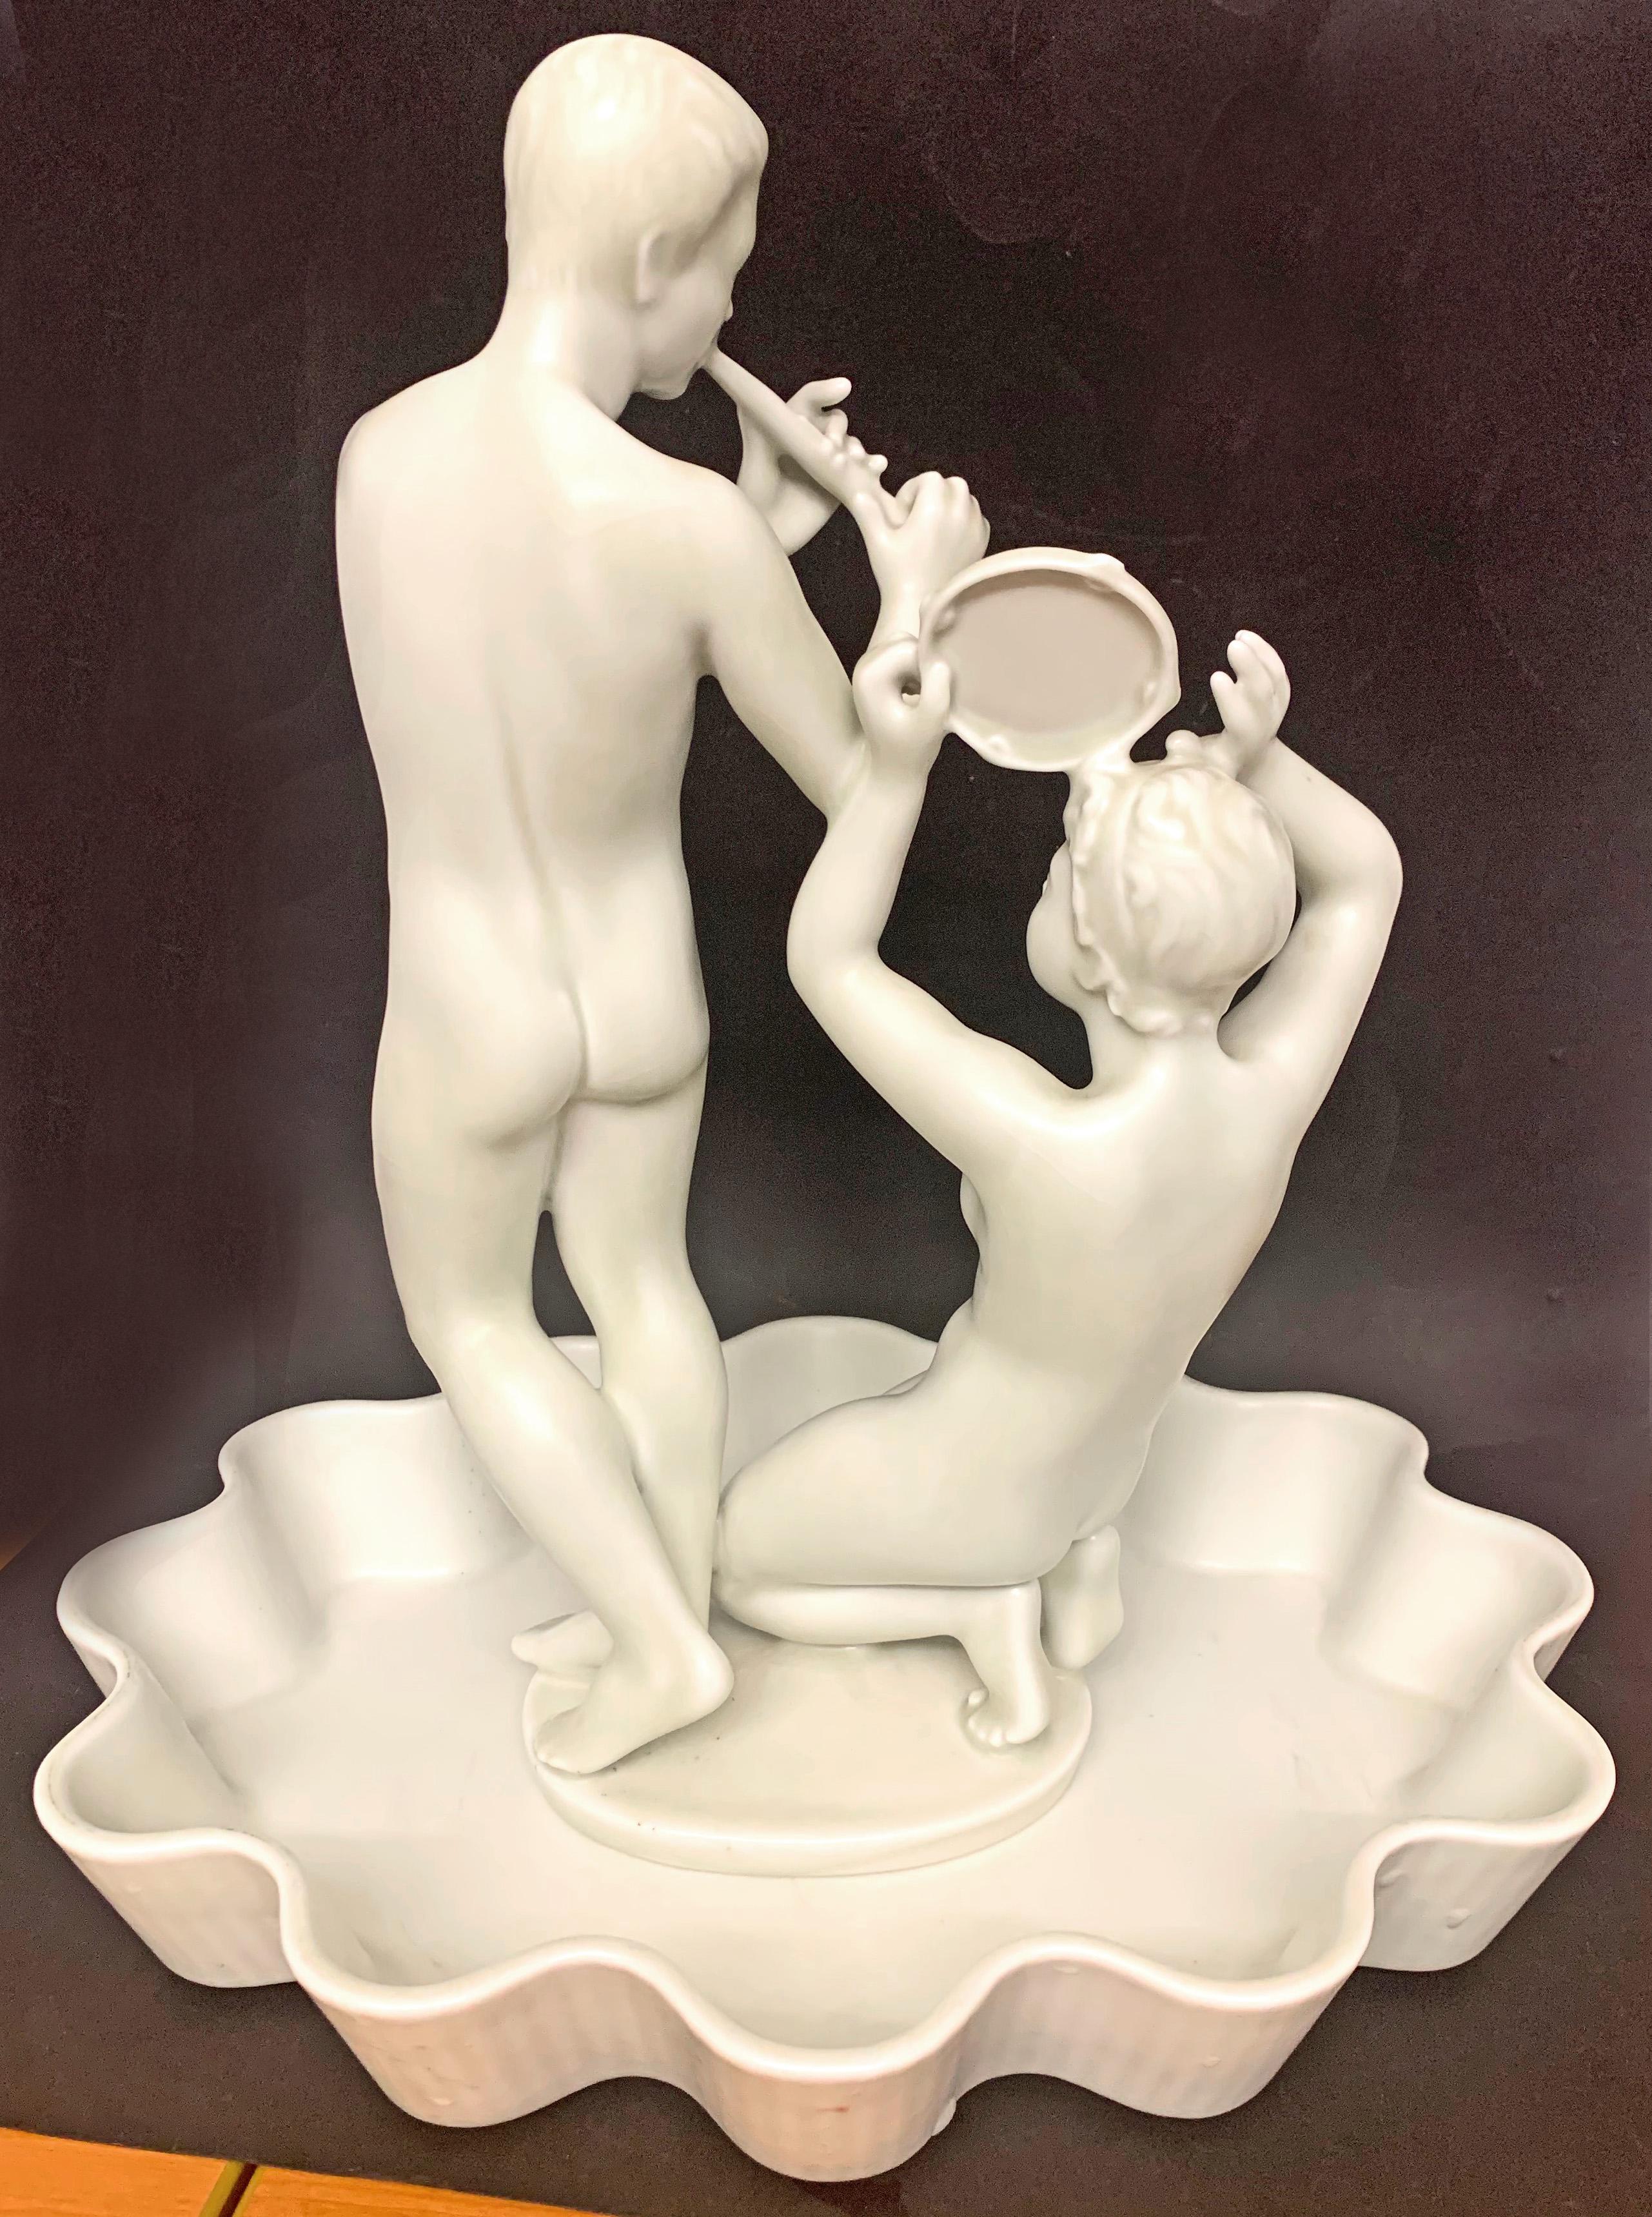 Beautifully finished in an ivory-hued glaze, this ambitious and rare sculptural grouping of a Pan and Nymph with flute and cymbal was sculpted by Harald Salomon for the famed Rörstrand porcelain works in Sweden. Salomon sculpted a number of nude